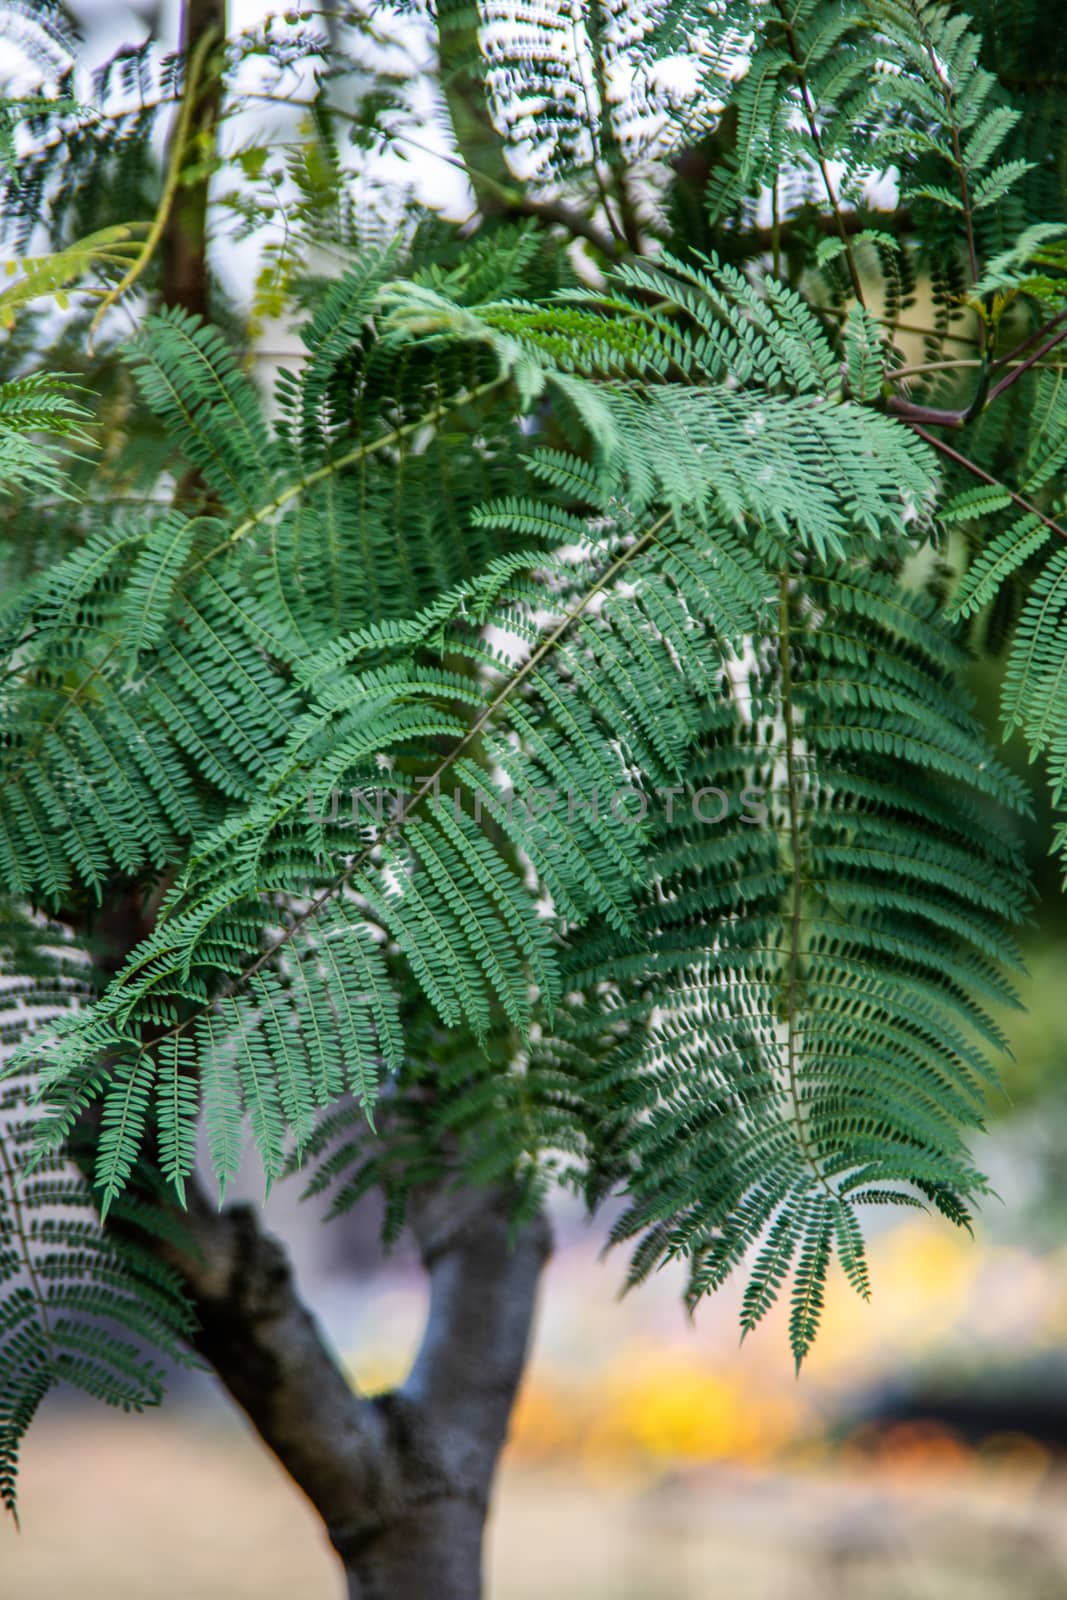 Mountain ash tree with pinnate leaves in the garden